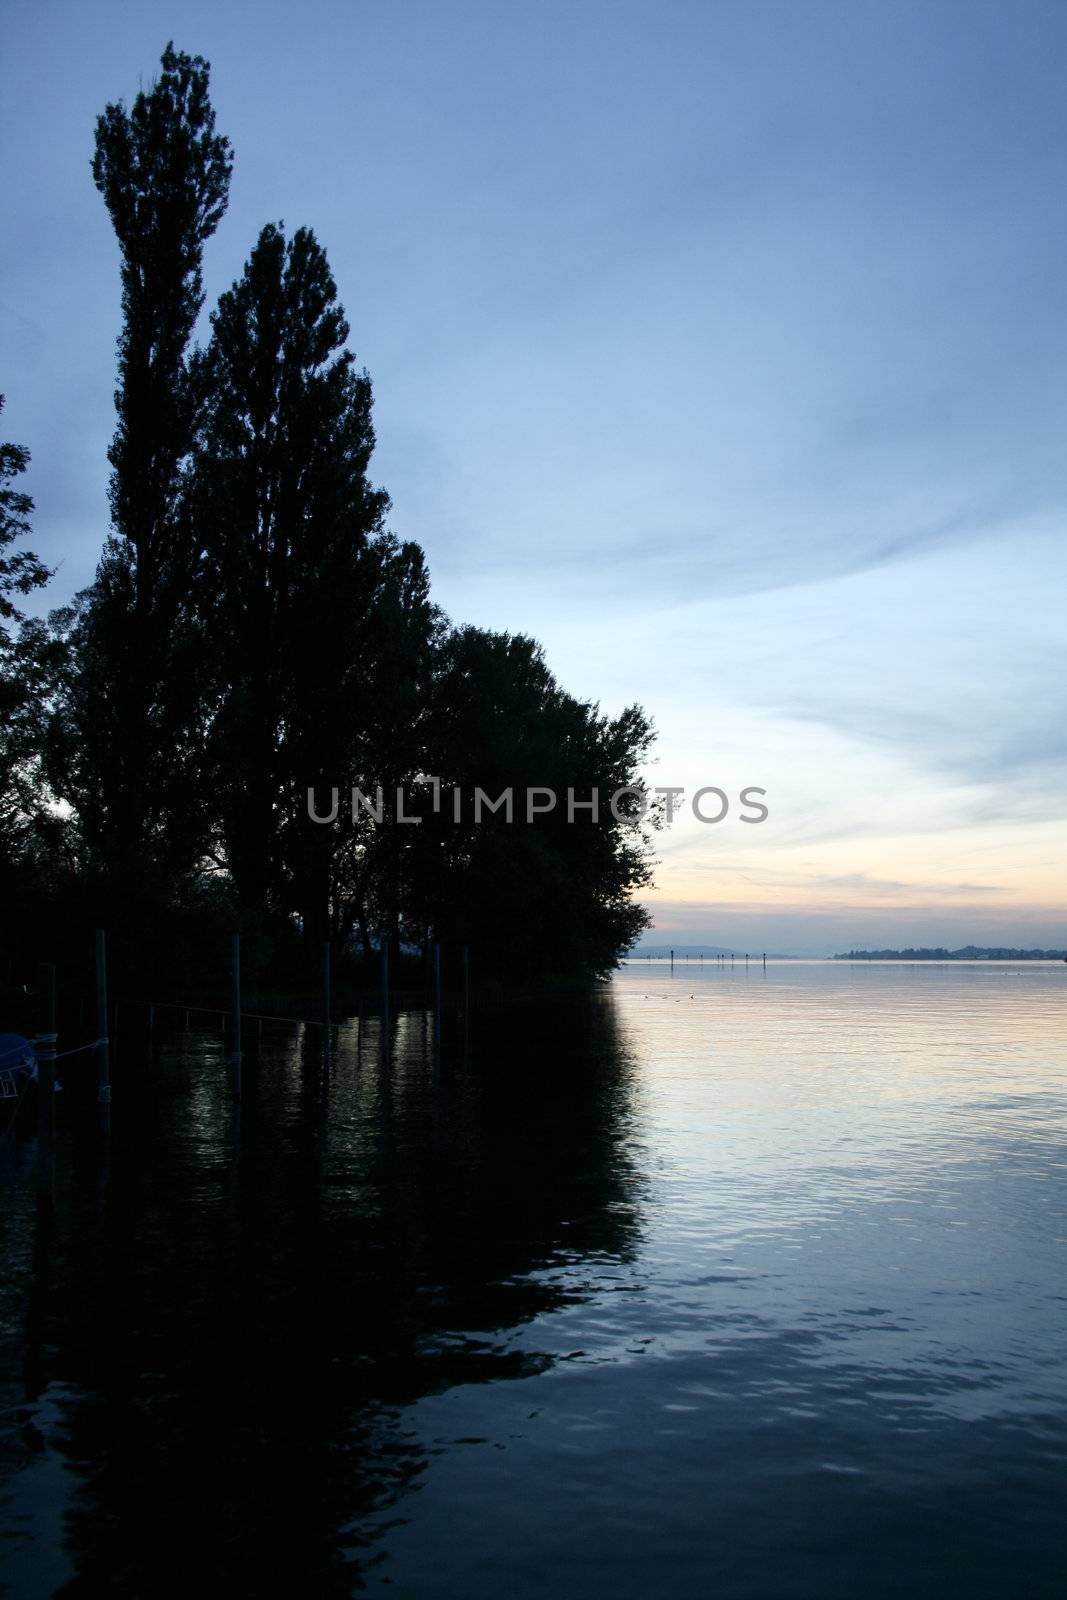 A sunset at the Lake Constance (Bodensee)